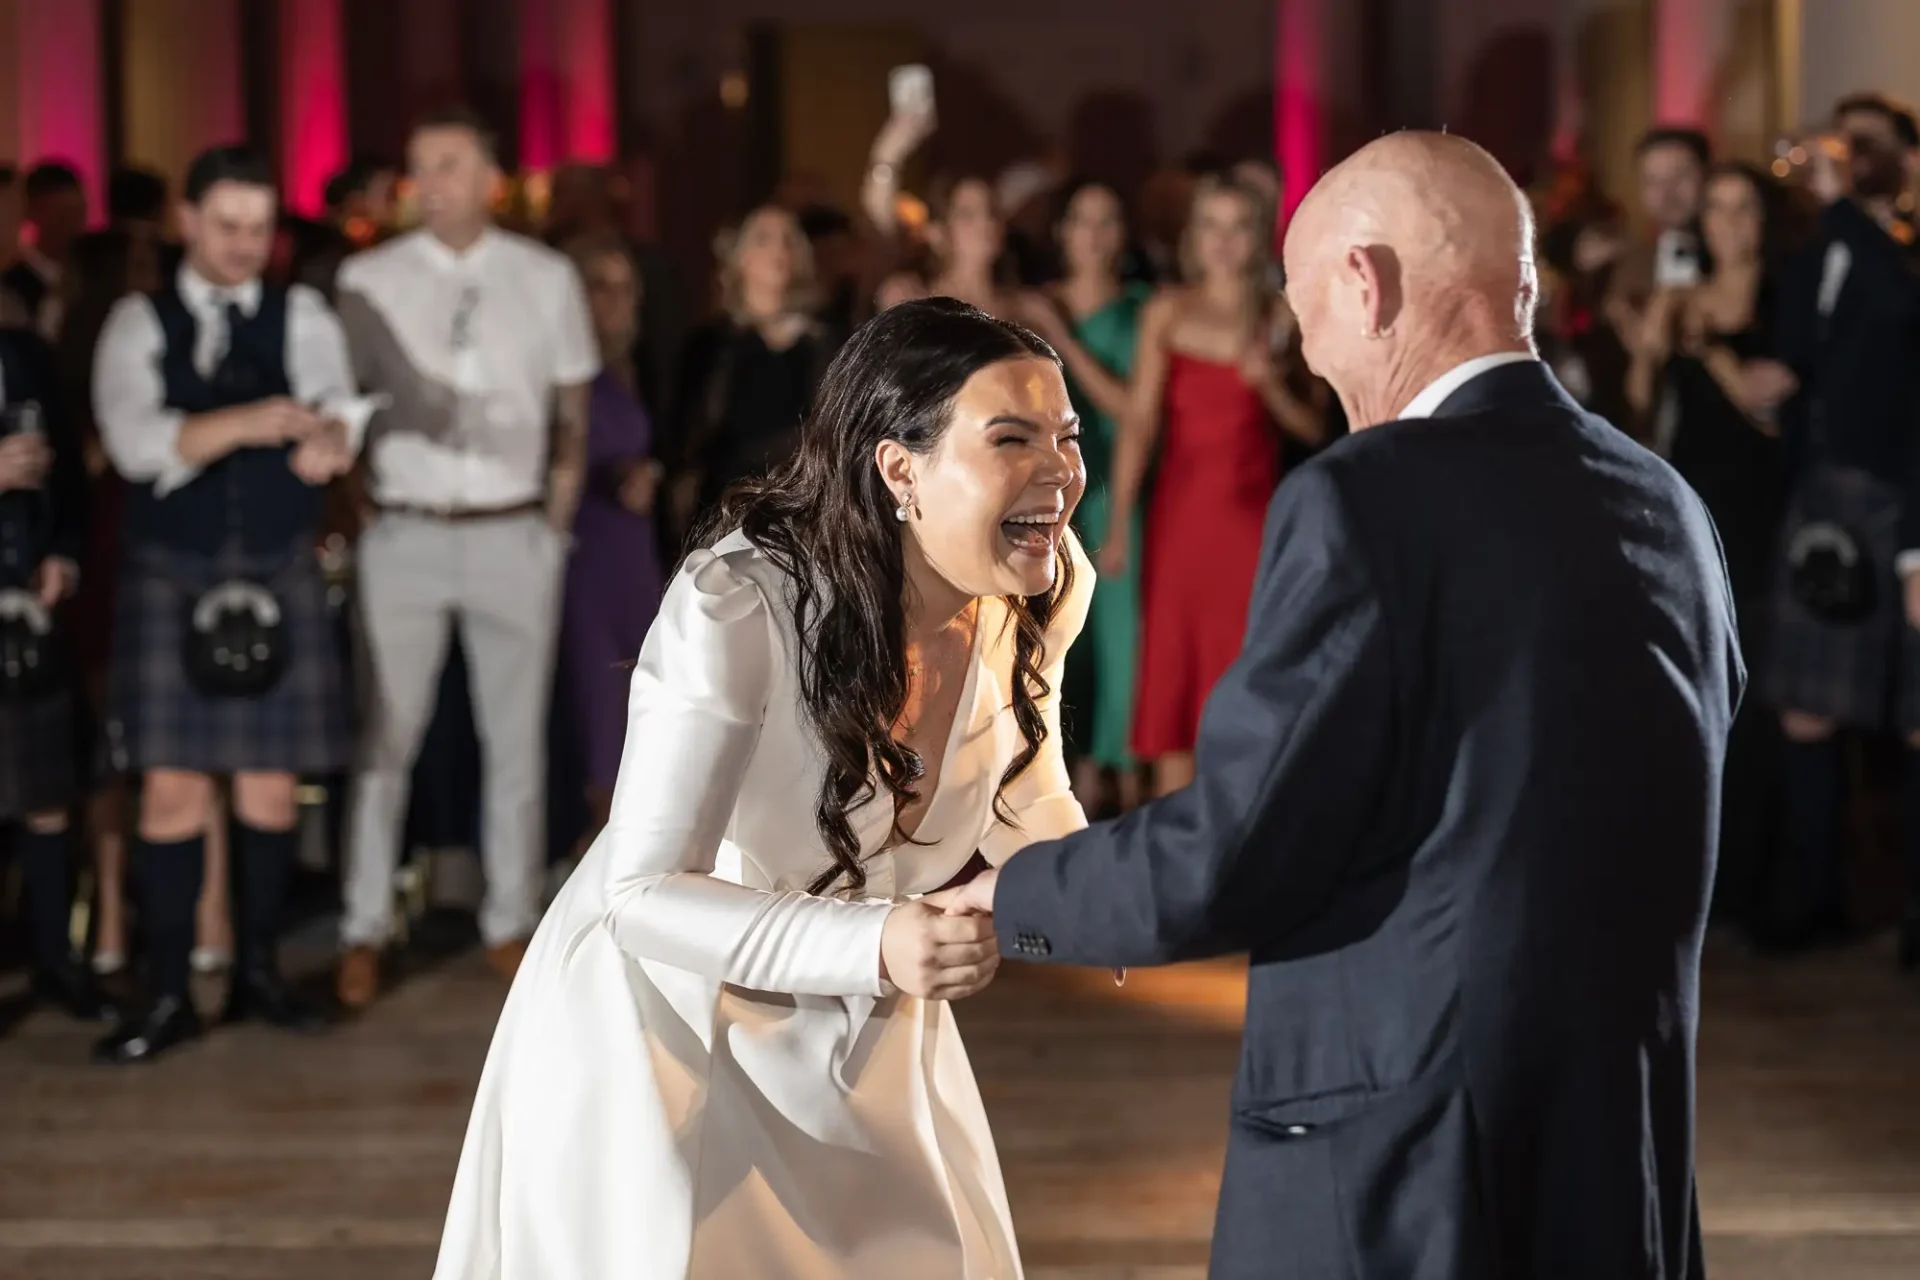 A bride in a white dress joyfully dances with a bald man in a suit at a wedding reception, surrounded by guests.
.